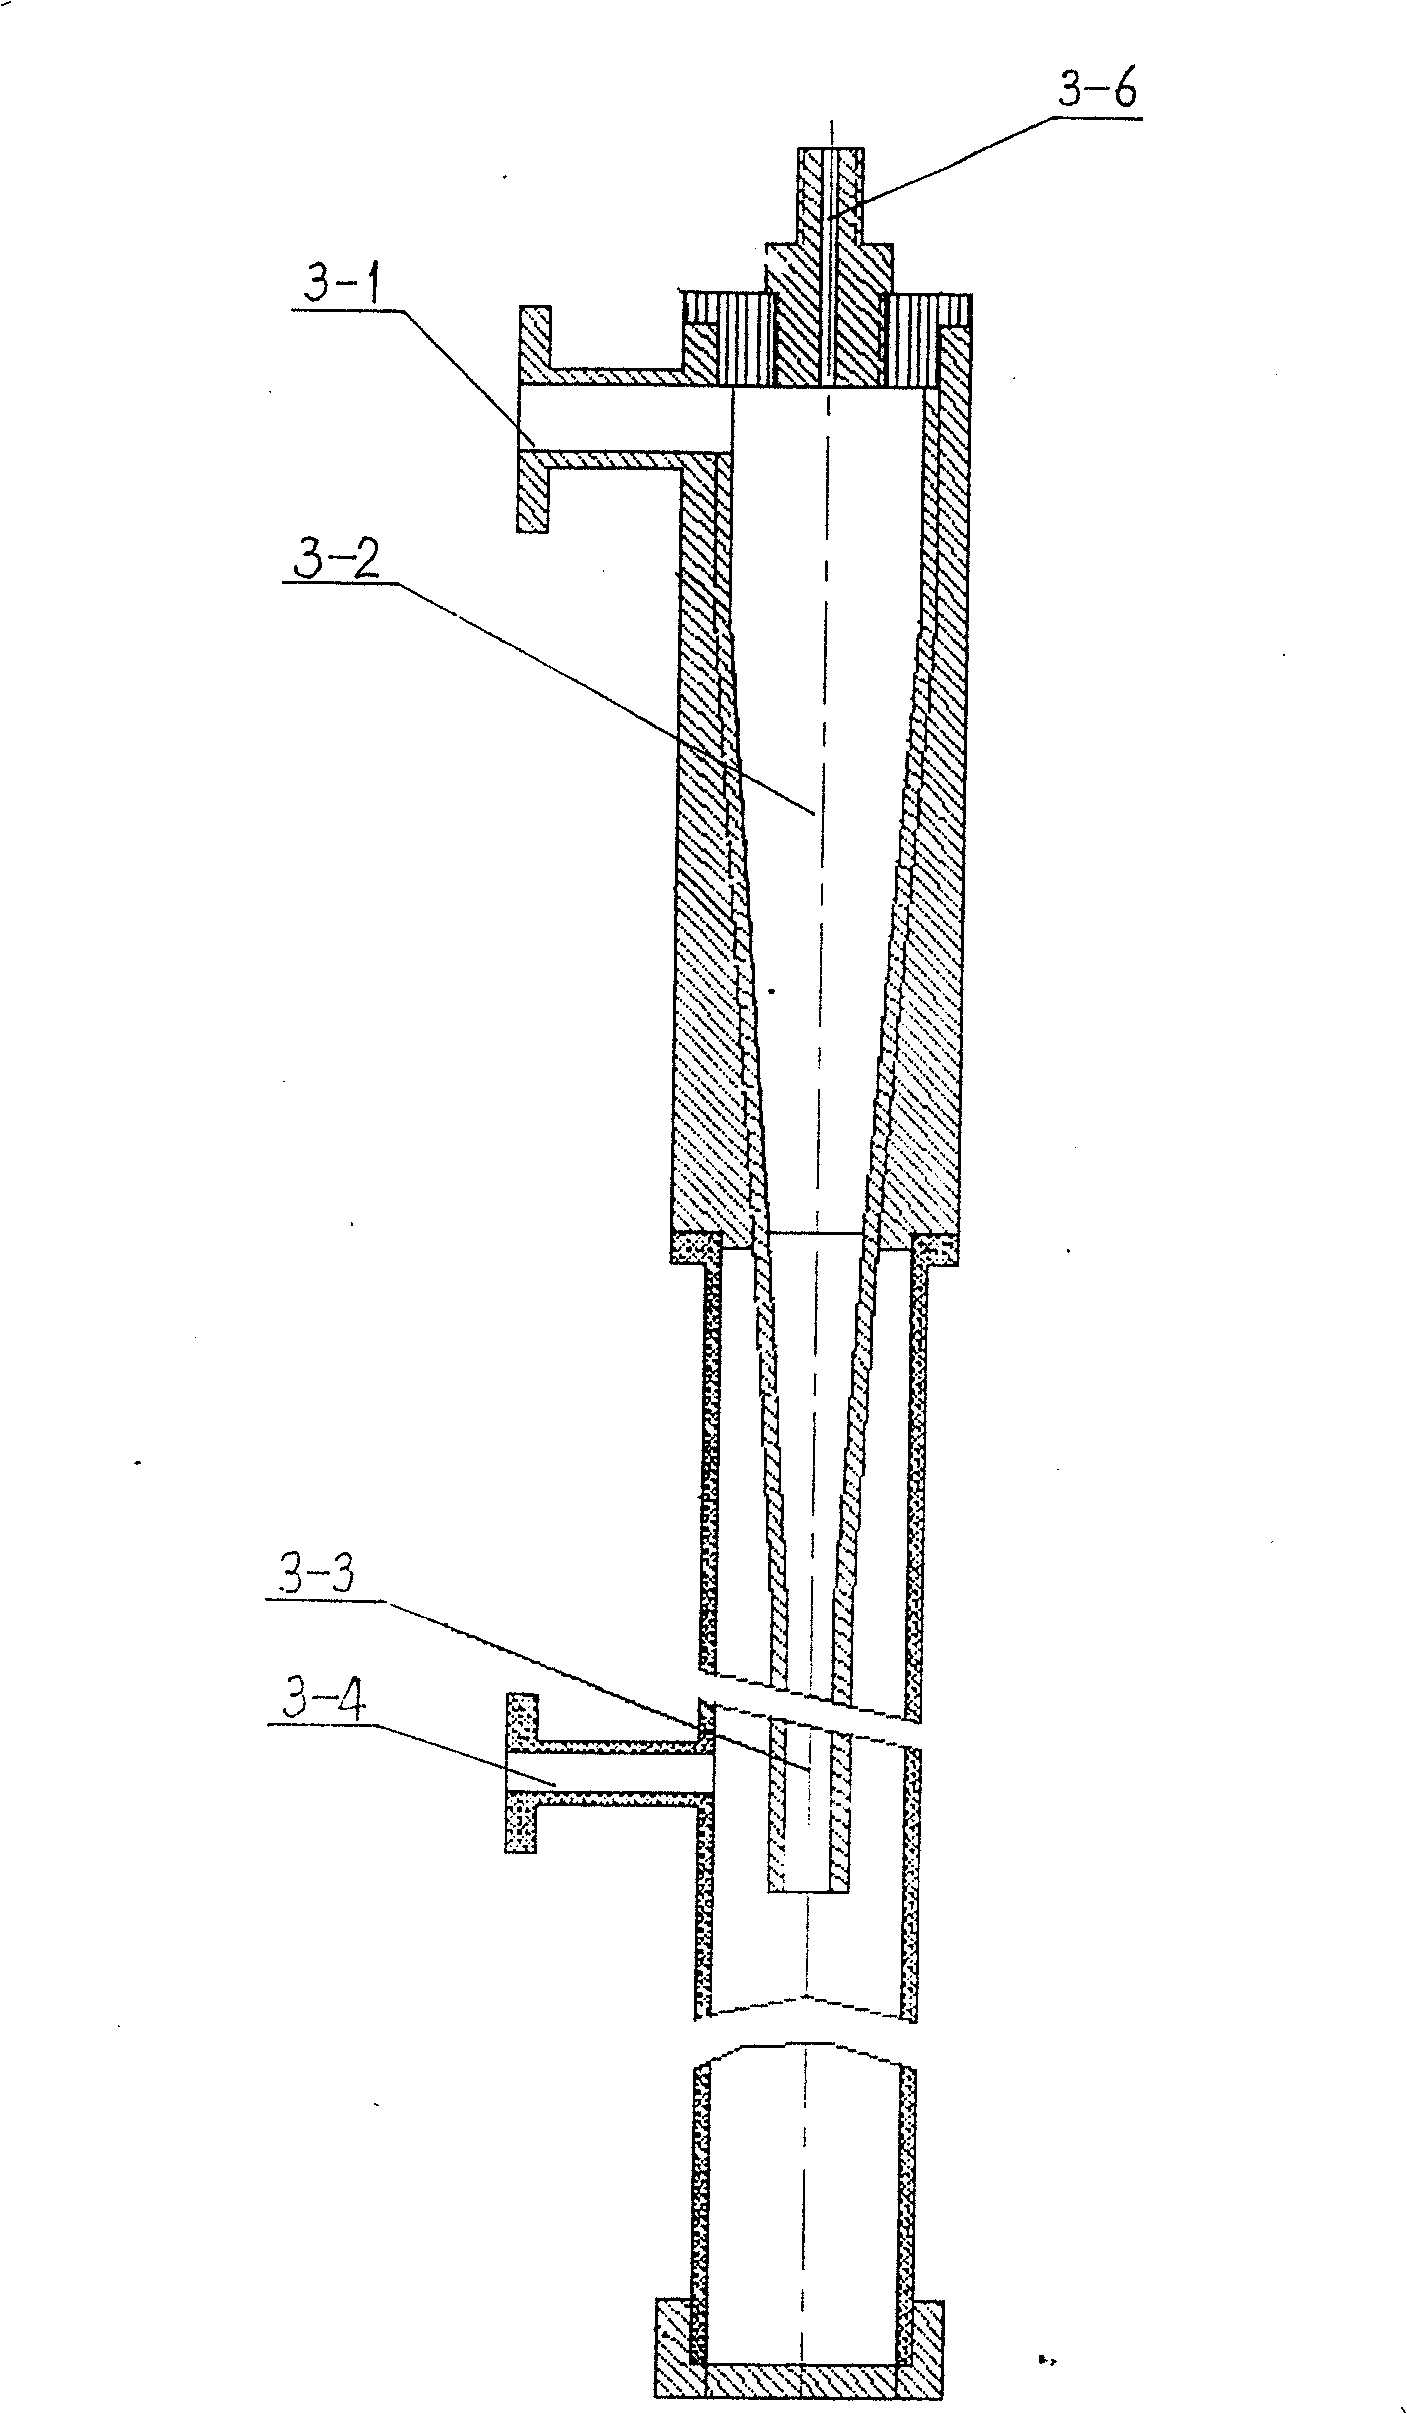 Process for assistant chemical treatment of oil field sullage rotational flow